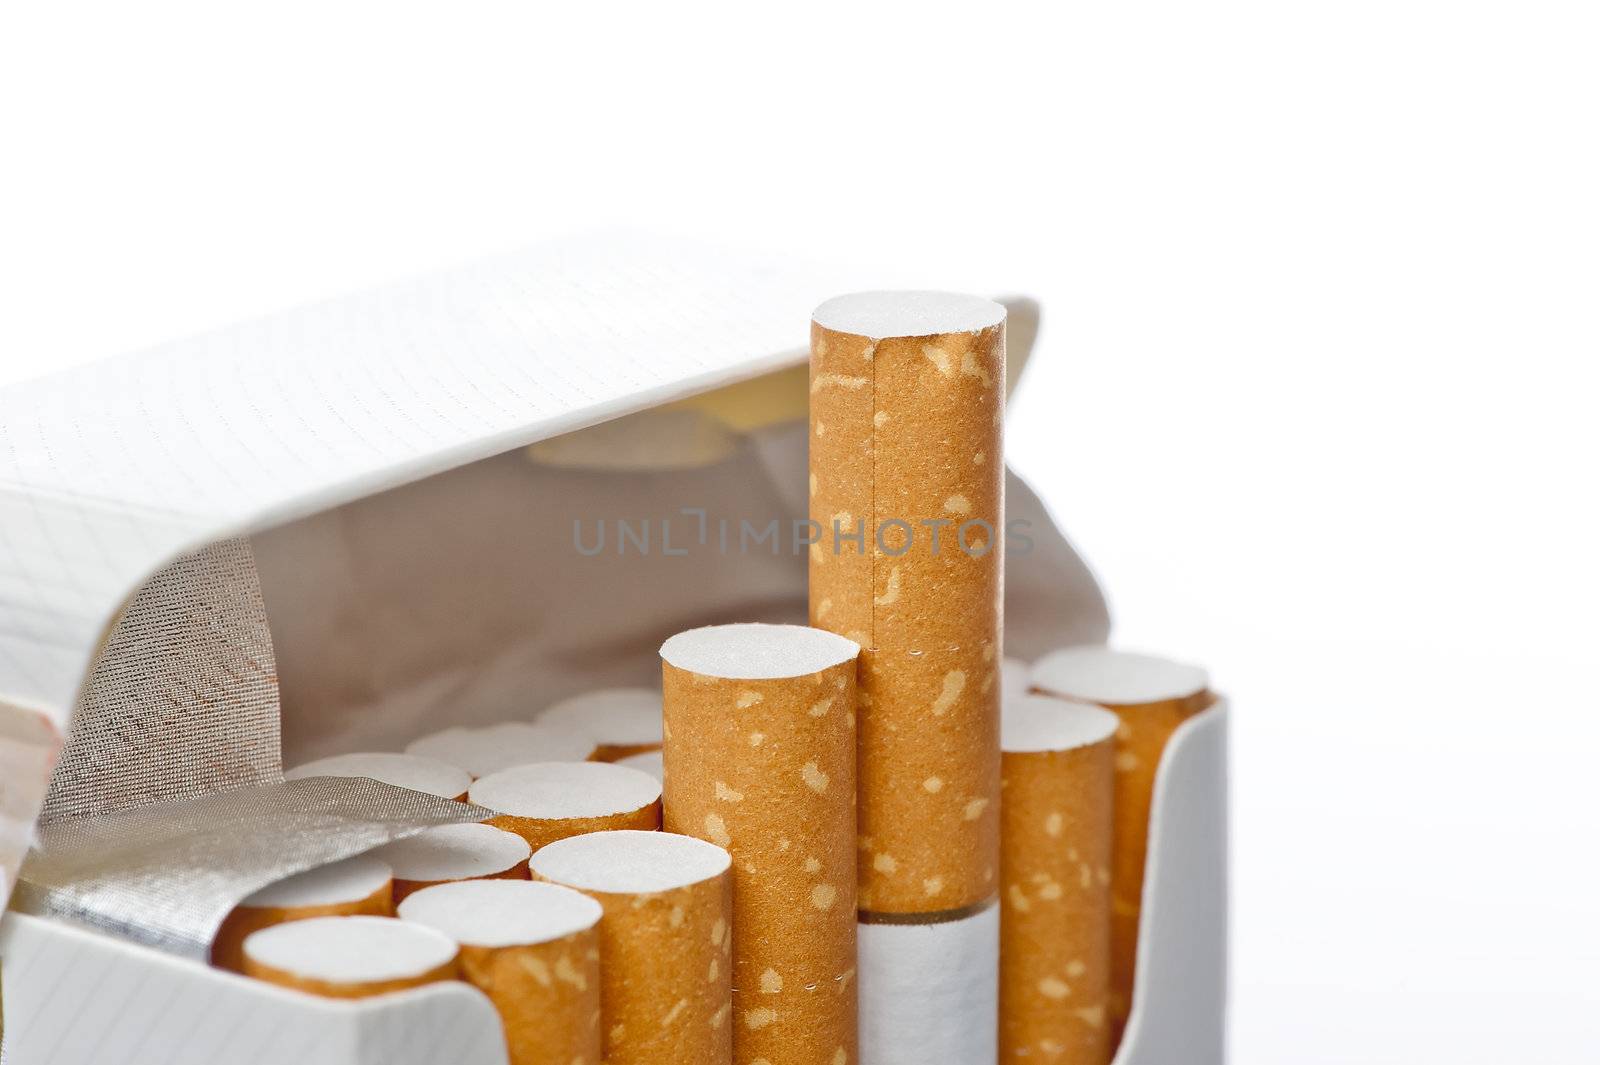 Open pack of cigarettes on a white background by kosmsos111